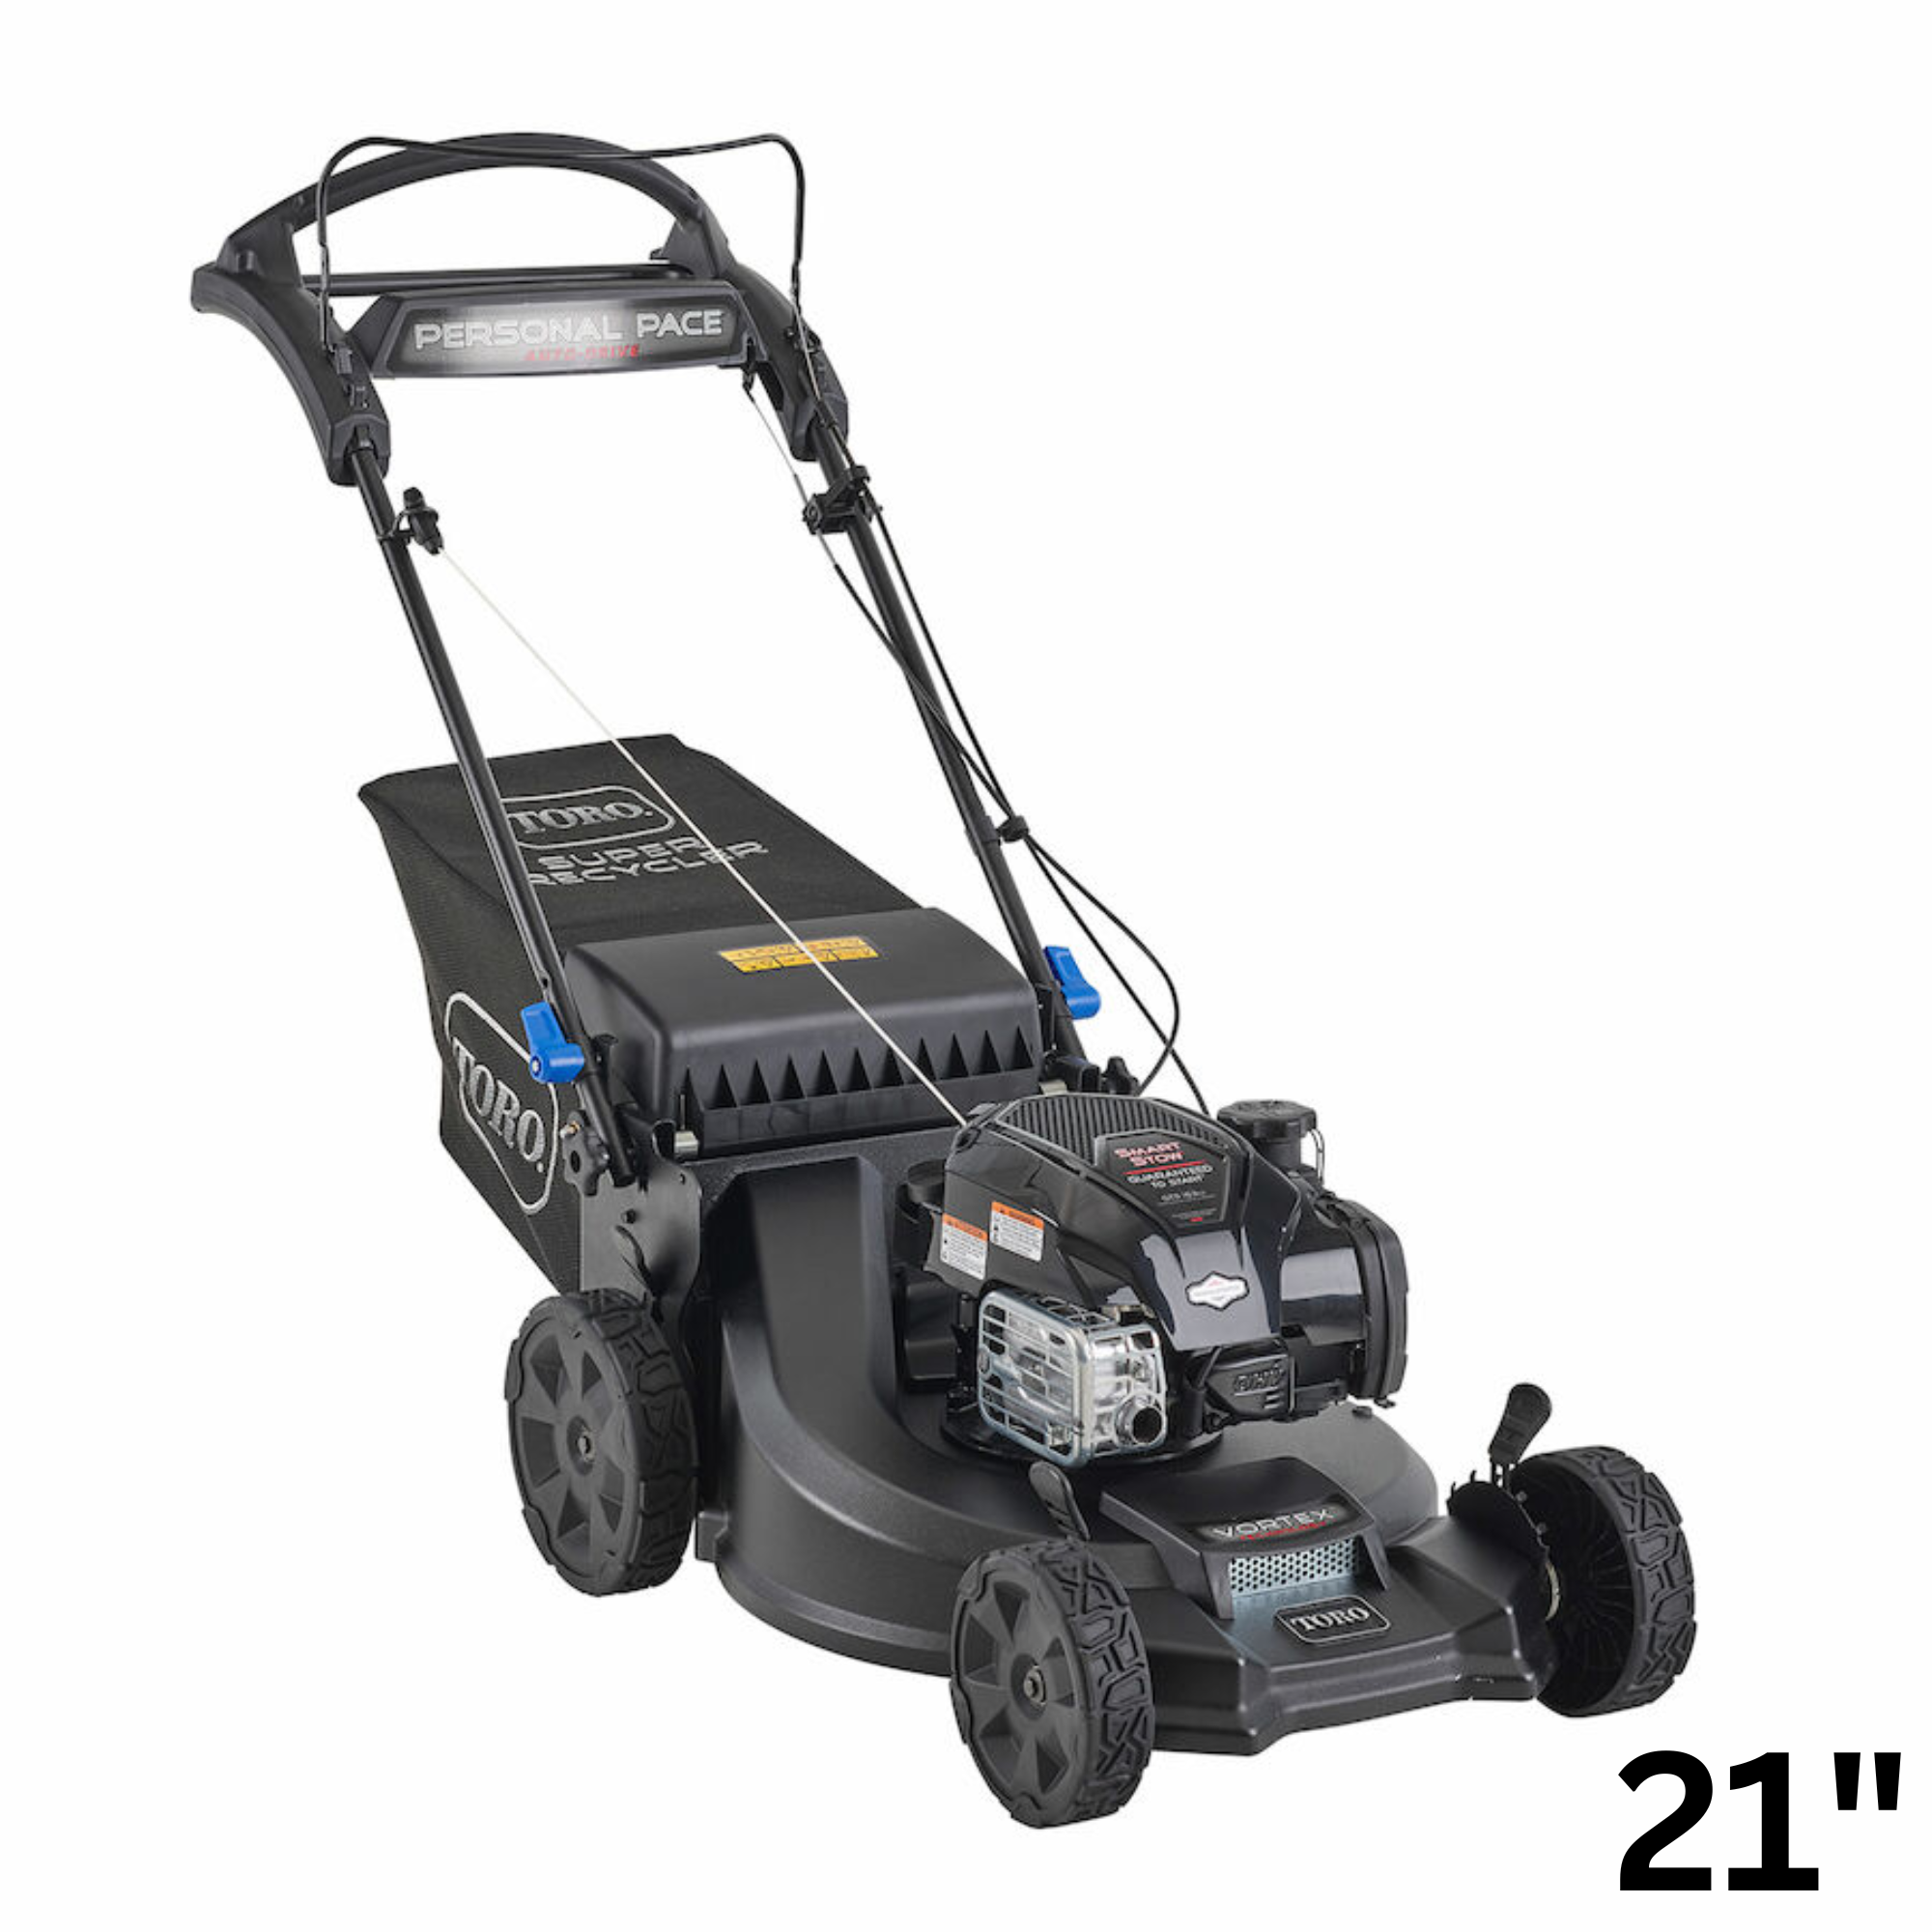 Toro 21 in. Super Recycler w/Personal Pace and SmartStow Gas Lawn Mower | 21565